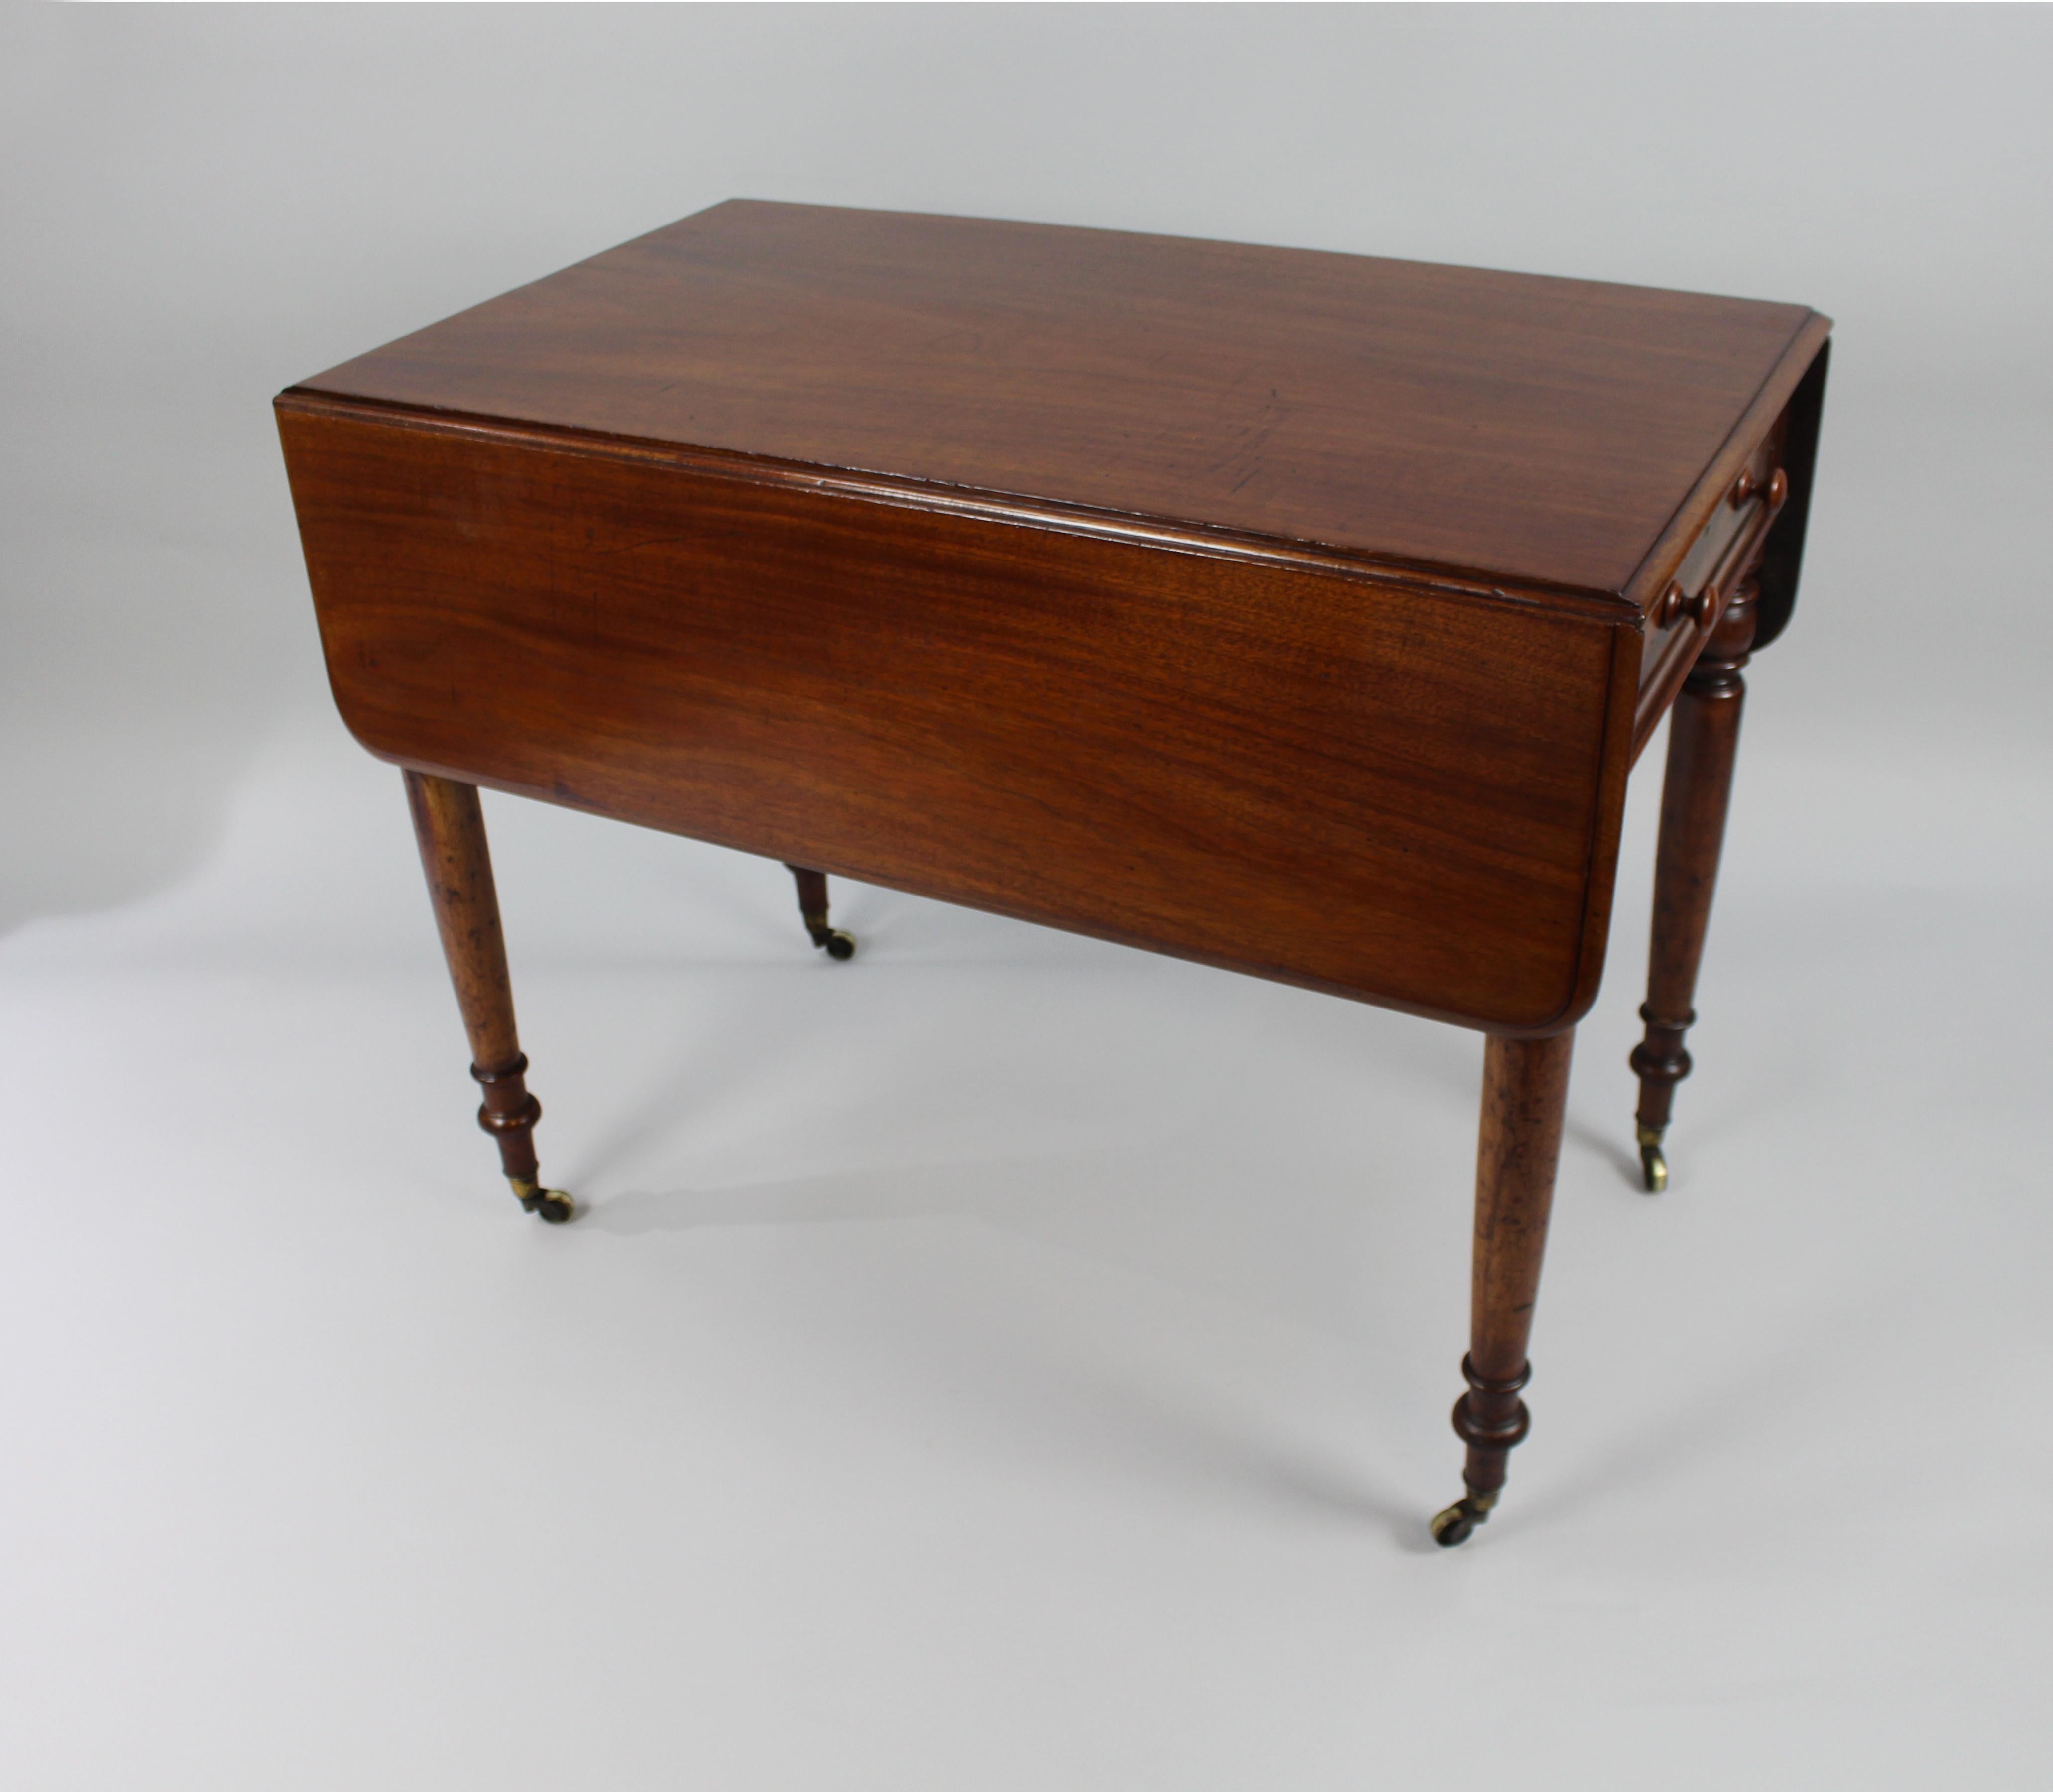 Measures: Length 91 cm 35 3/4 in 
Width (leaves down) 53.5 cm
21 in 
Width (leaves up) 103 cm 40 1/2 in 
Height 74 cm 29 in 
 
 

Period:
Regency

Wood: 
Mahogany

Condition: 
Very good condition. Sound structure. A few marks